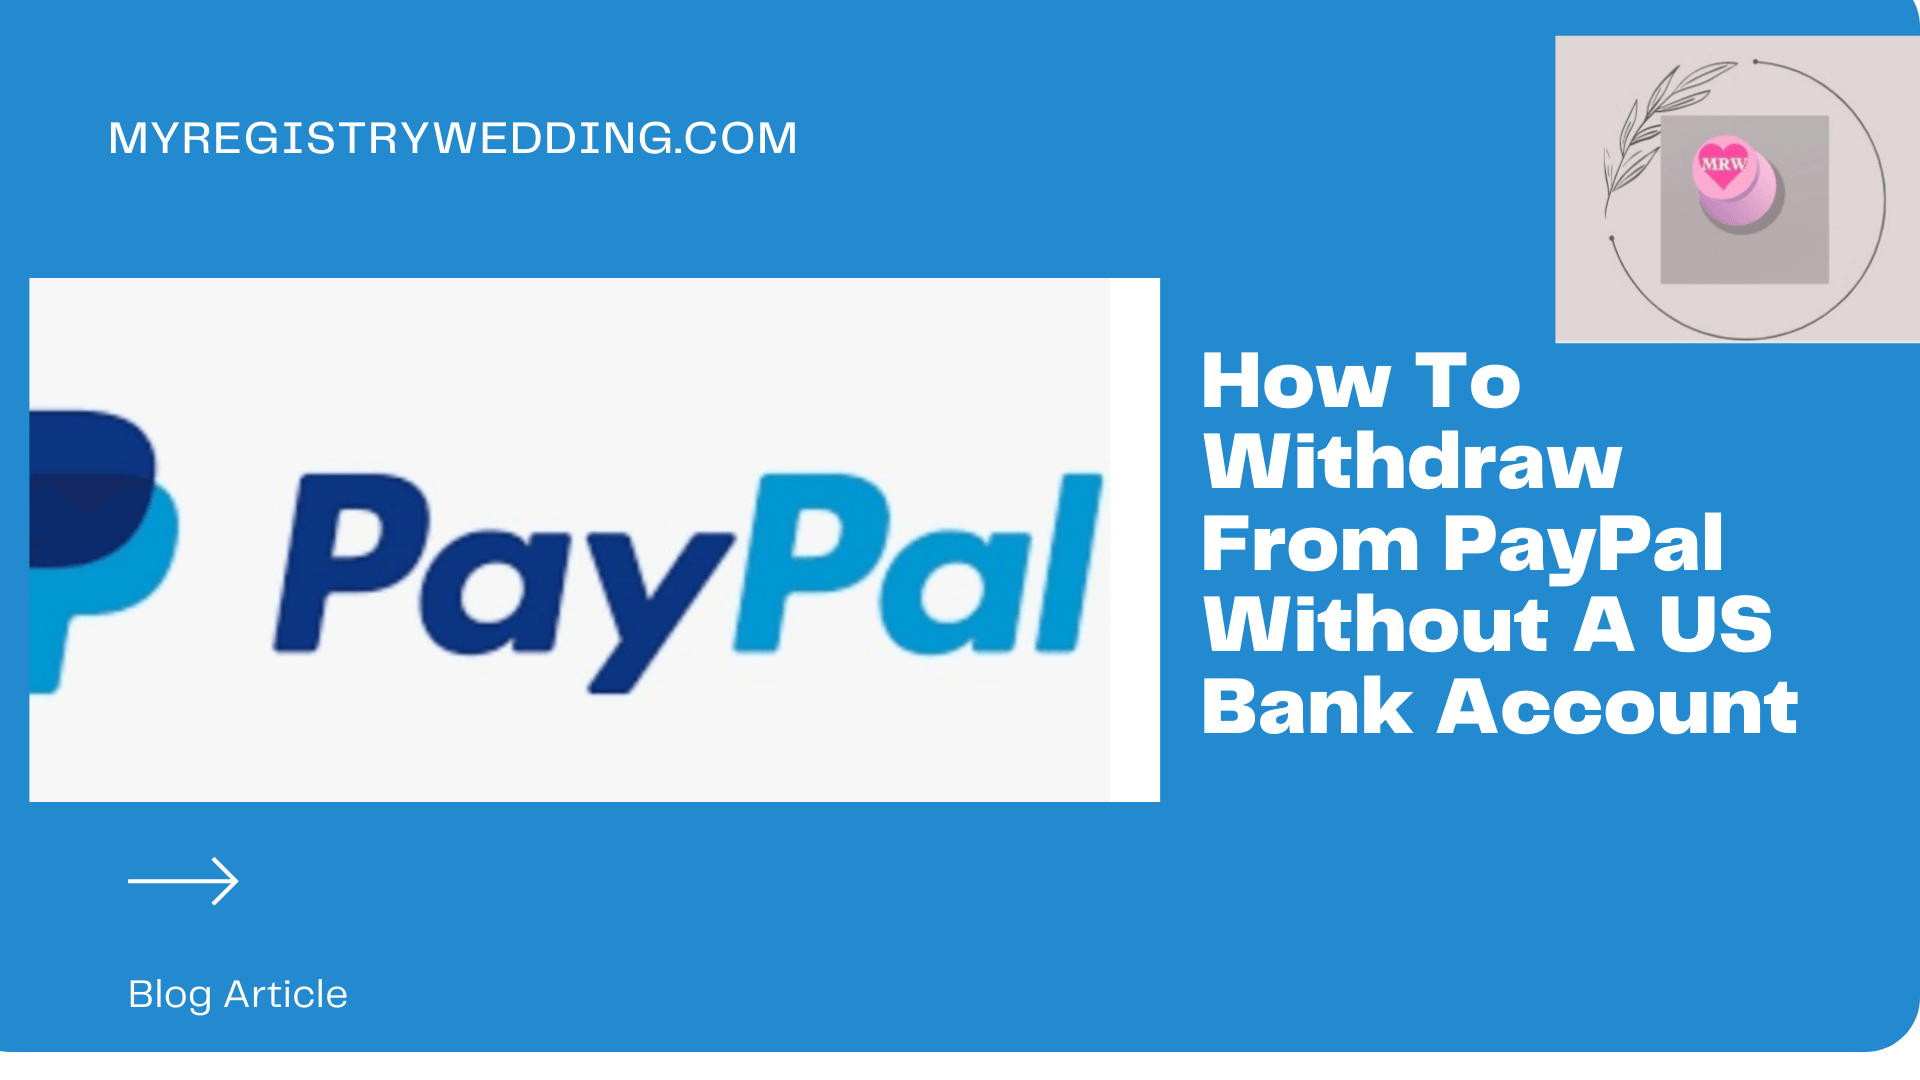 How do I add my credit or debit card to my PayPal account?